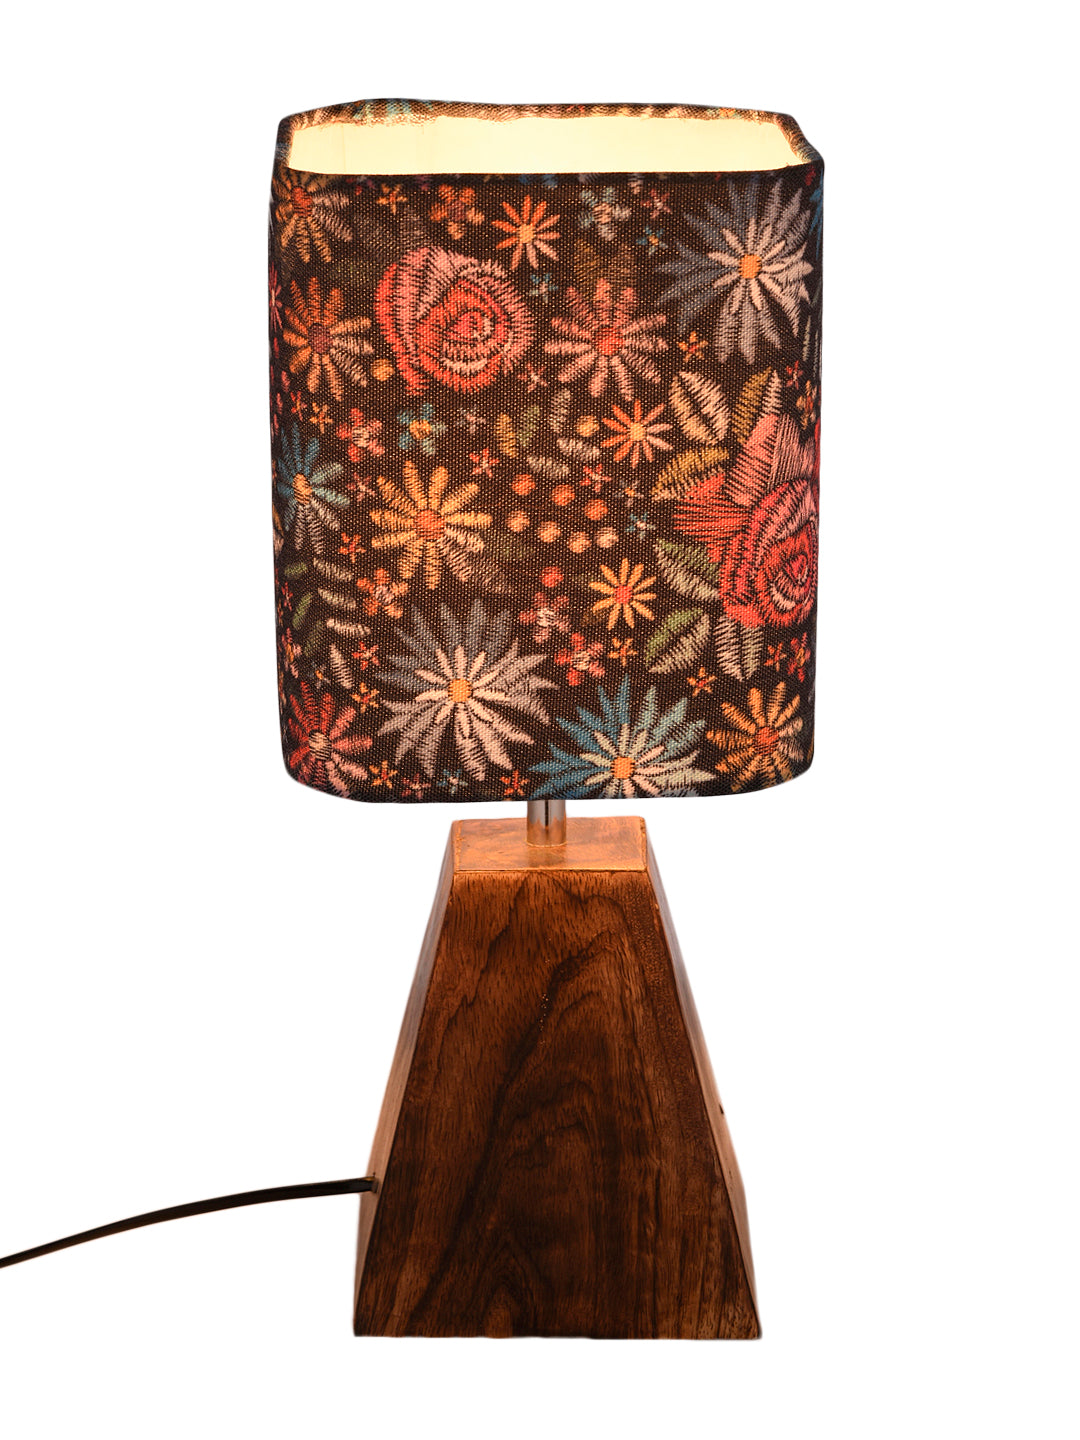 Wooden Pyramid Lamp with Black Floral Stich Lamp Shade